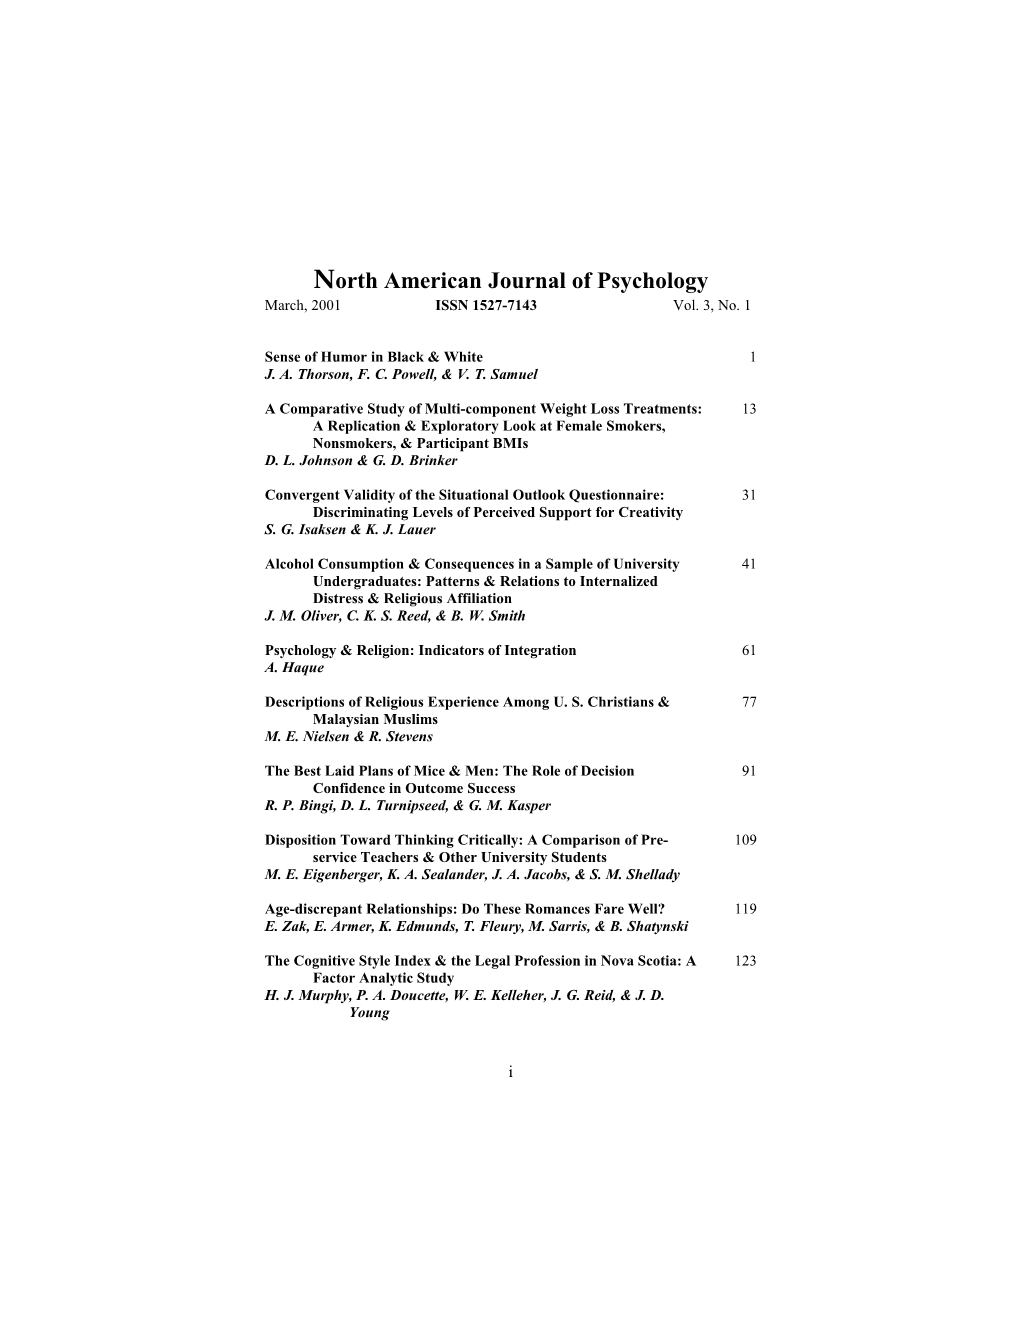 North American Journal of Psychology s1